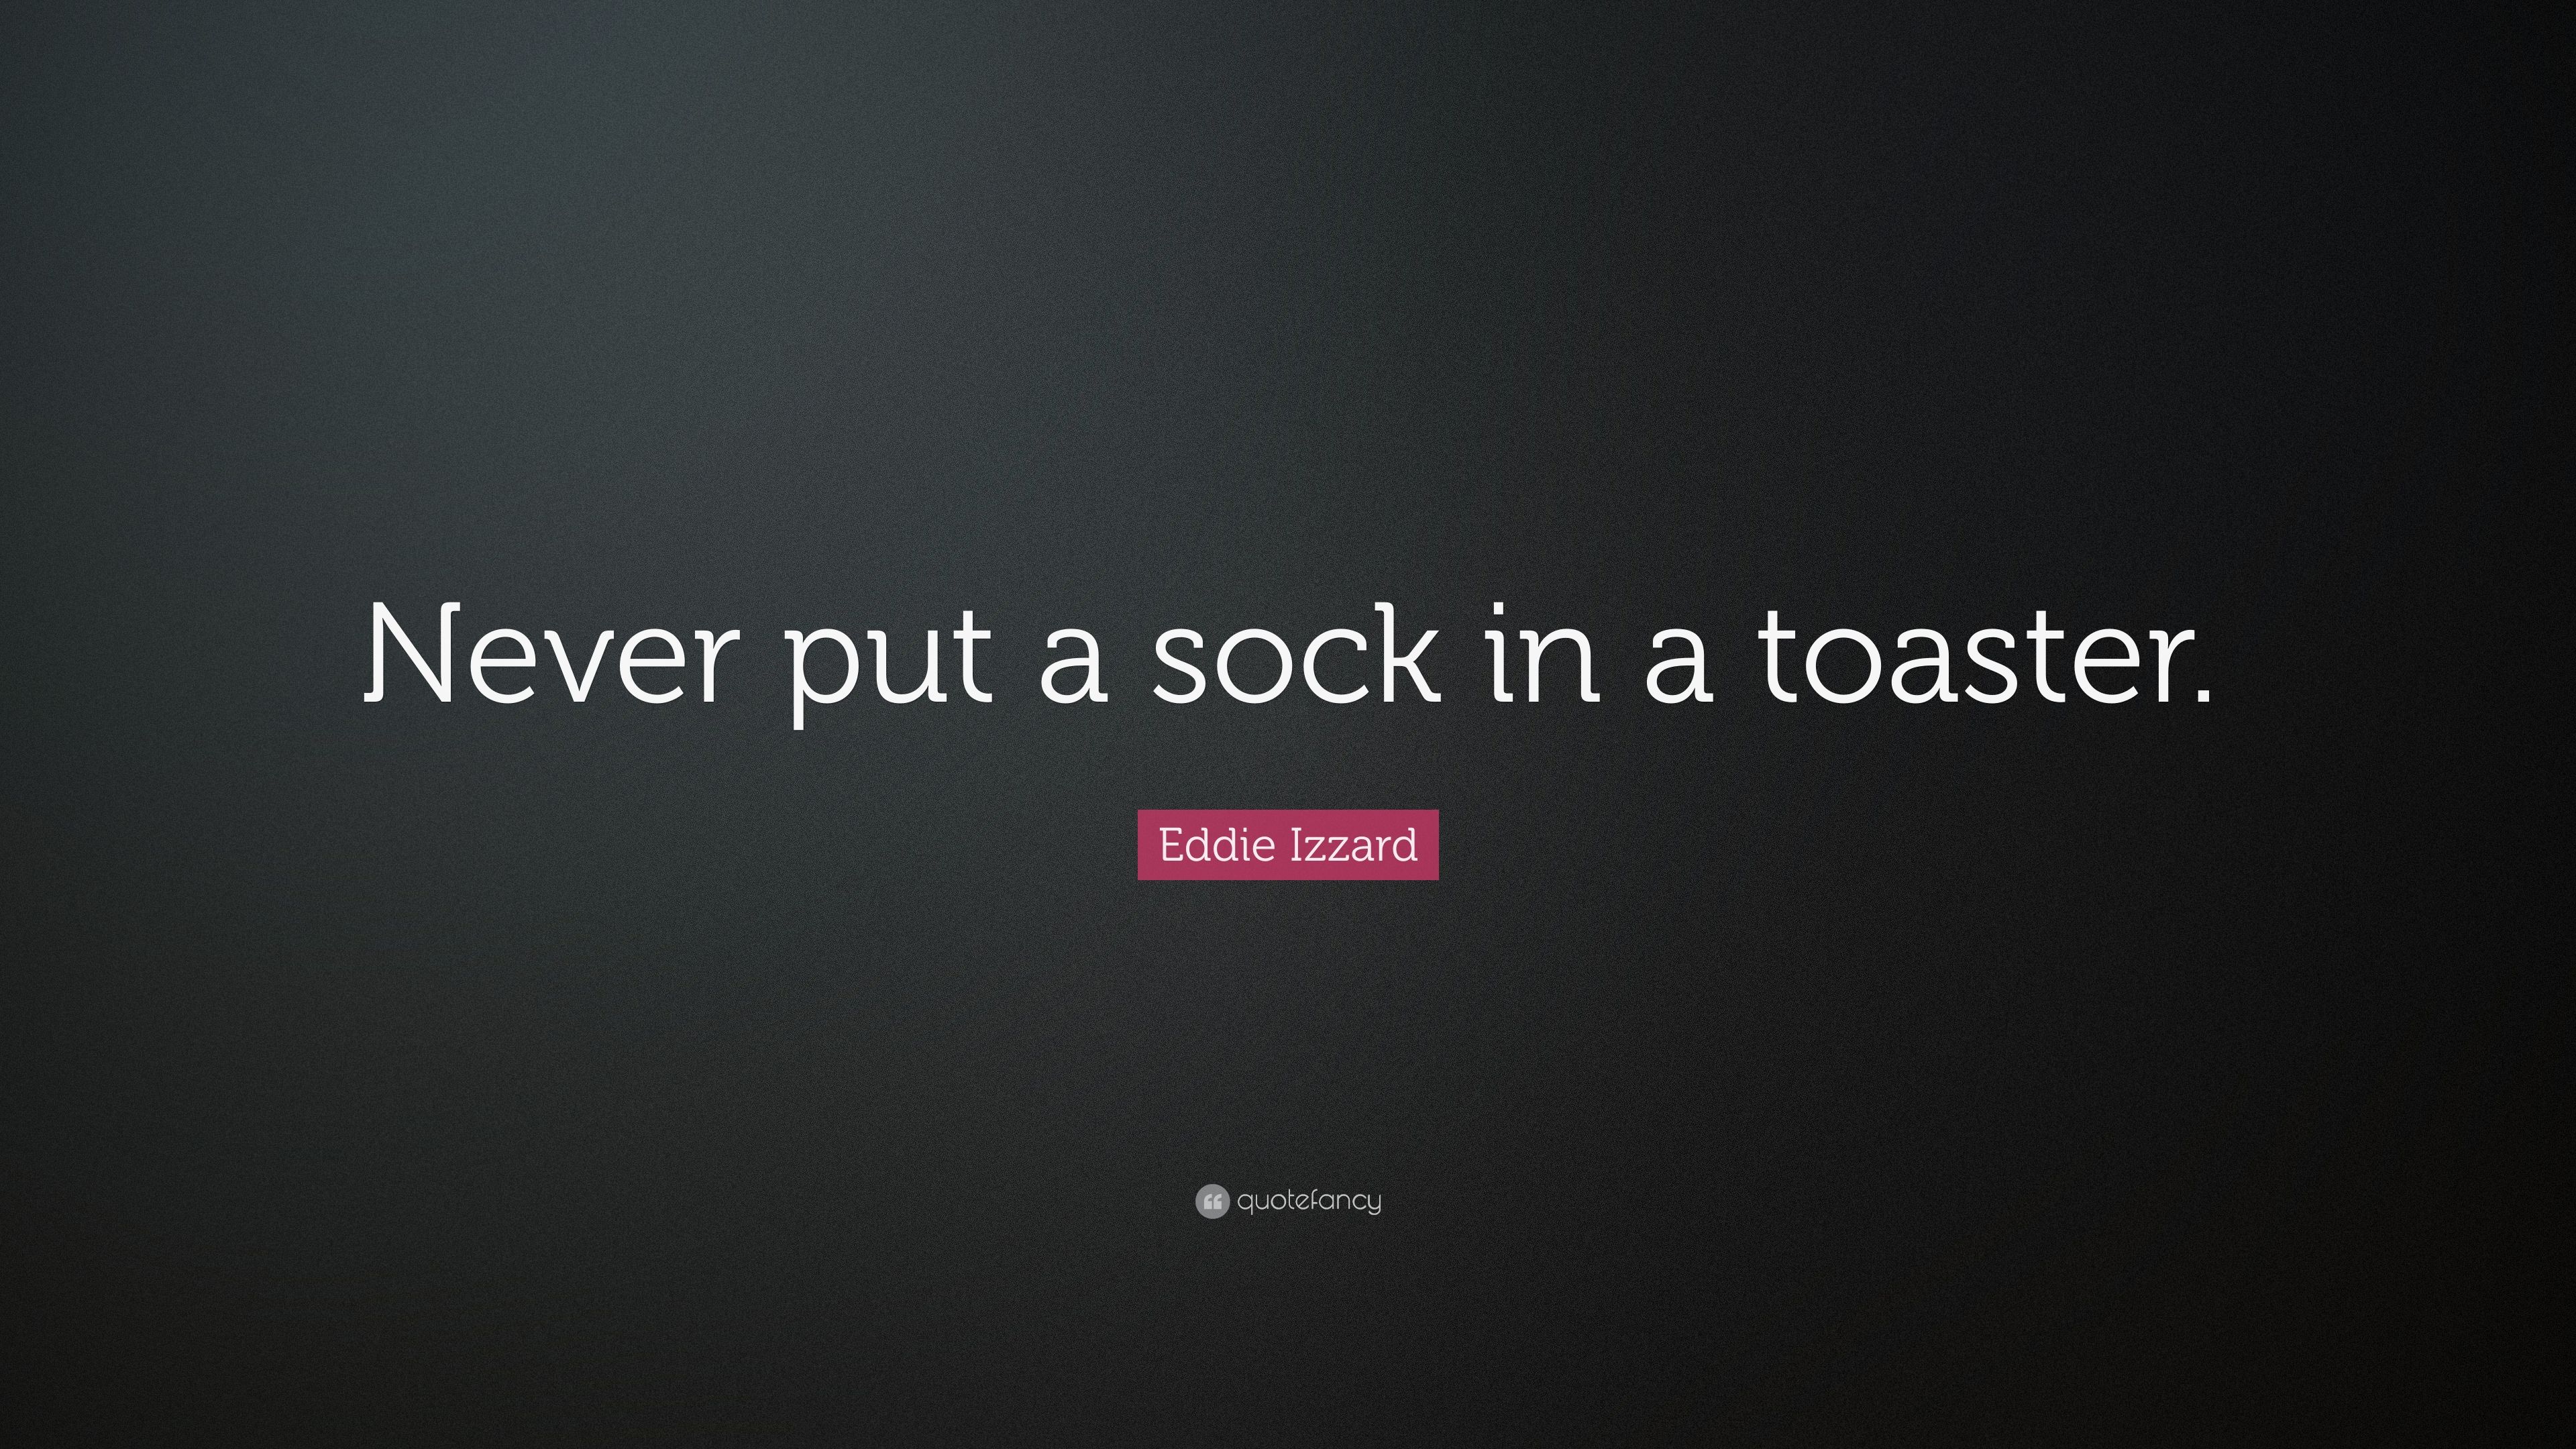 Eddie Izzard Quote: “Never put a sock in a toaster.” 9